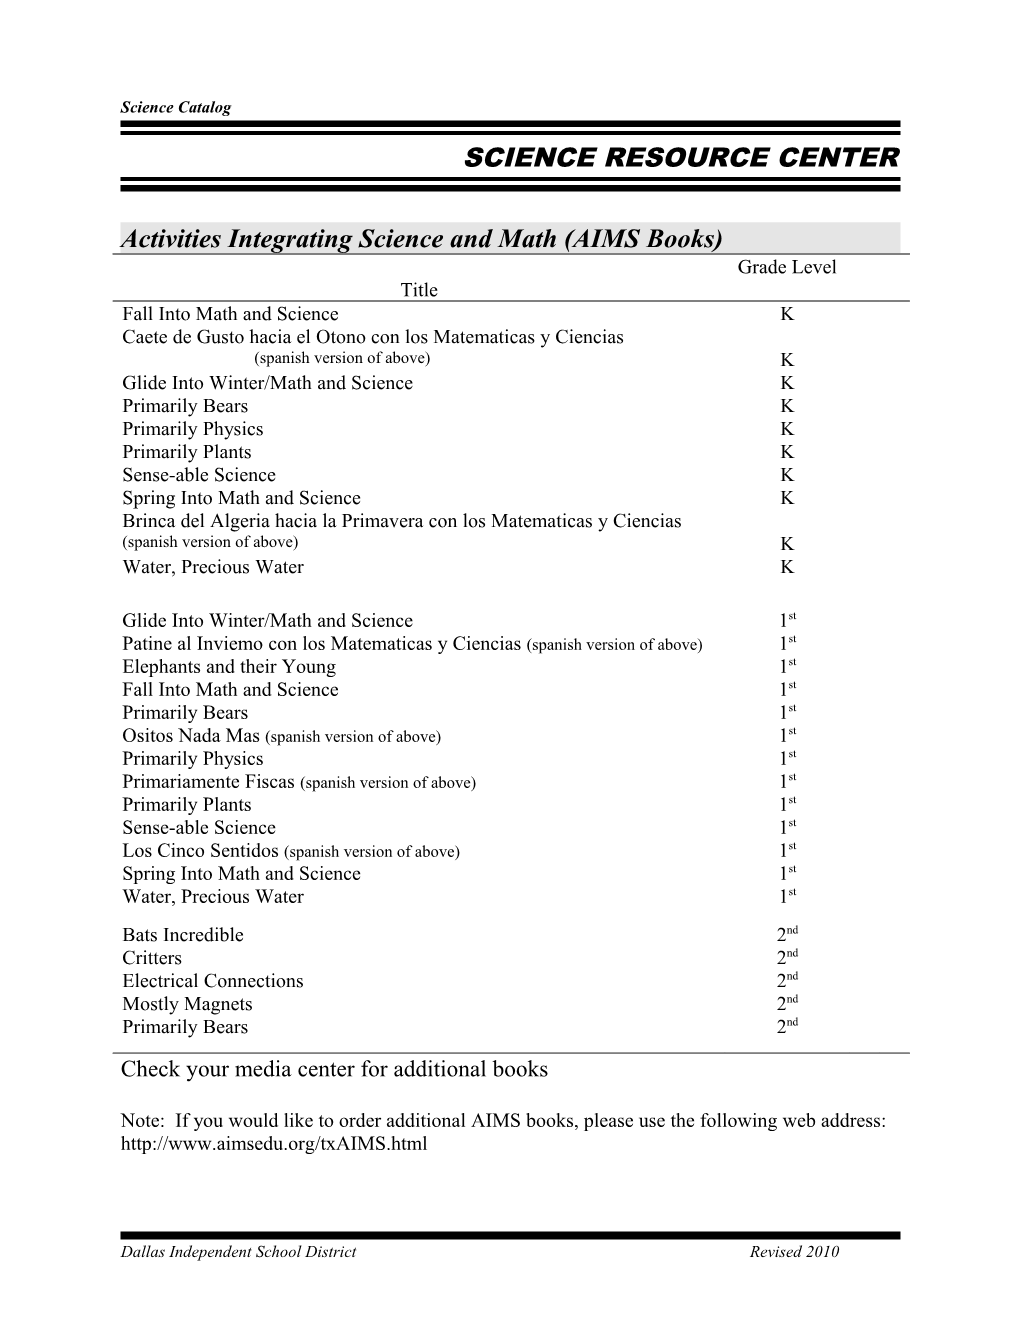 Activities Integrating Science and Math (AIMS Books)